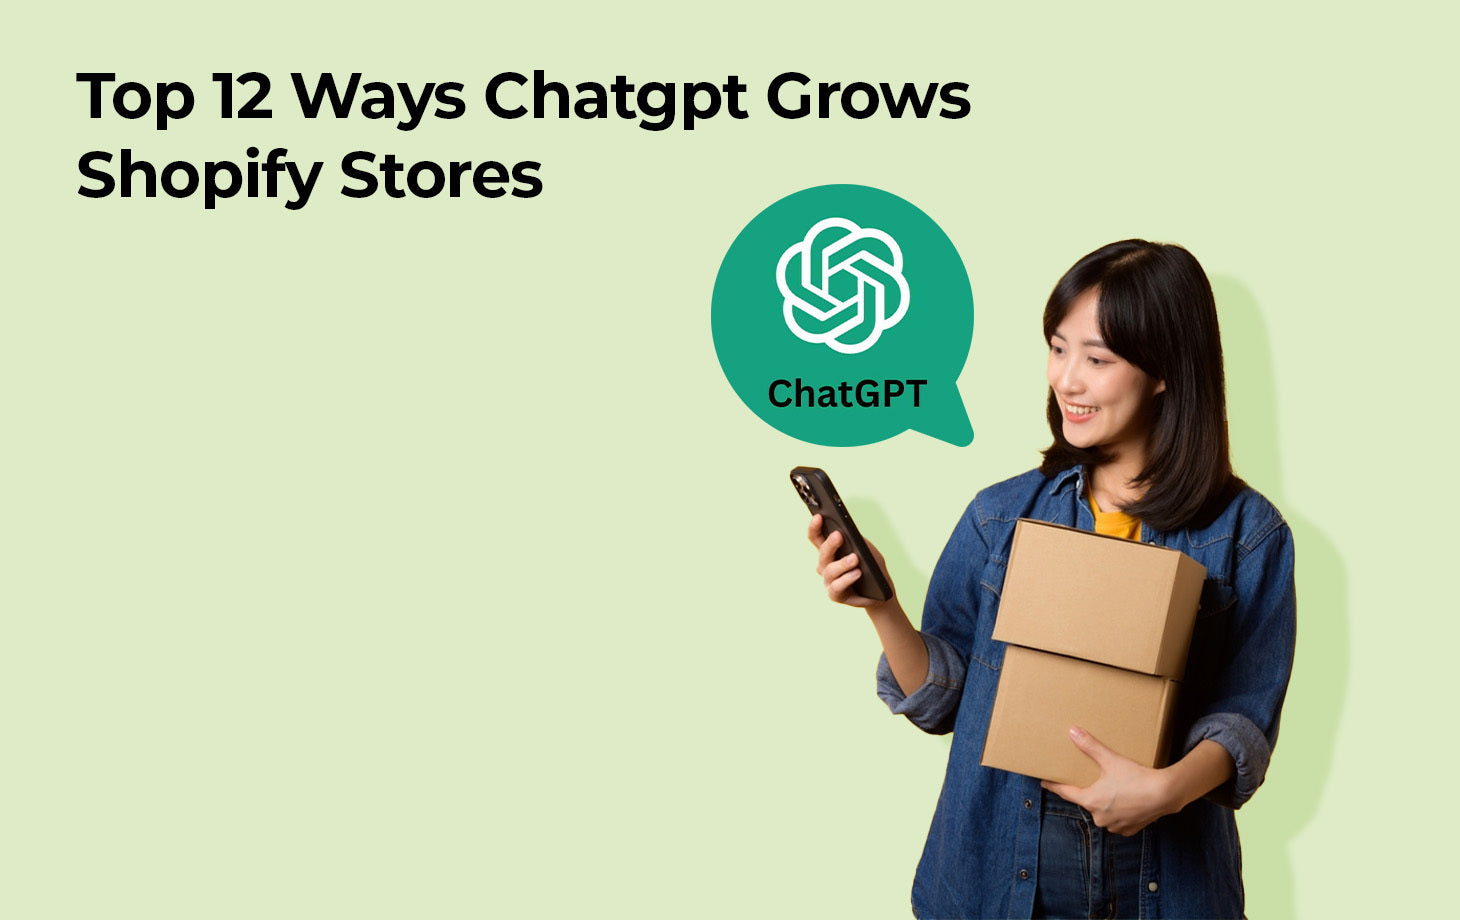 Chatgpt for shopify : top 12 ways chatgpt can grow your shopify store